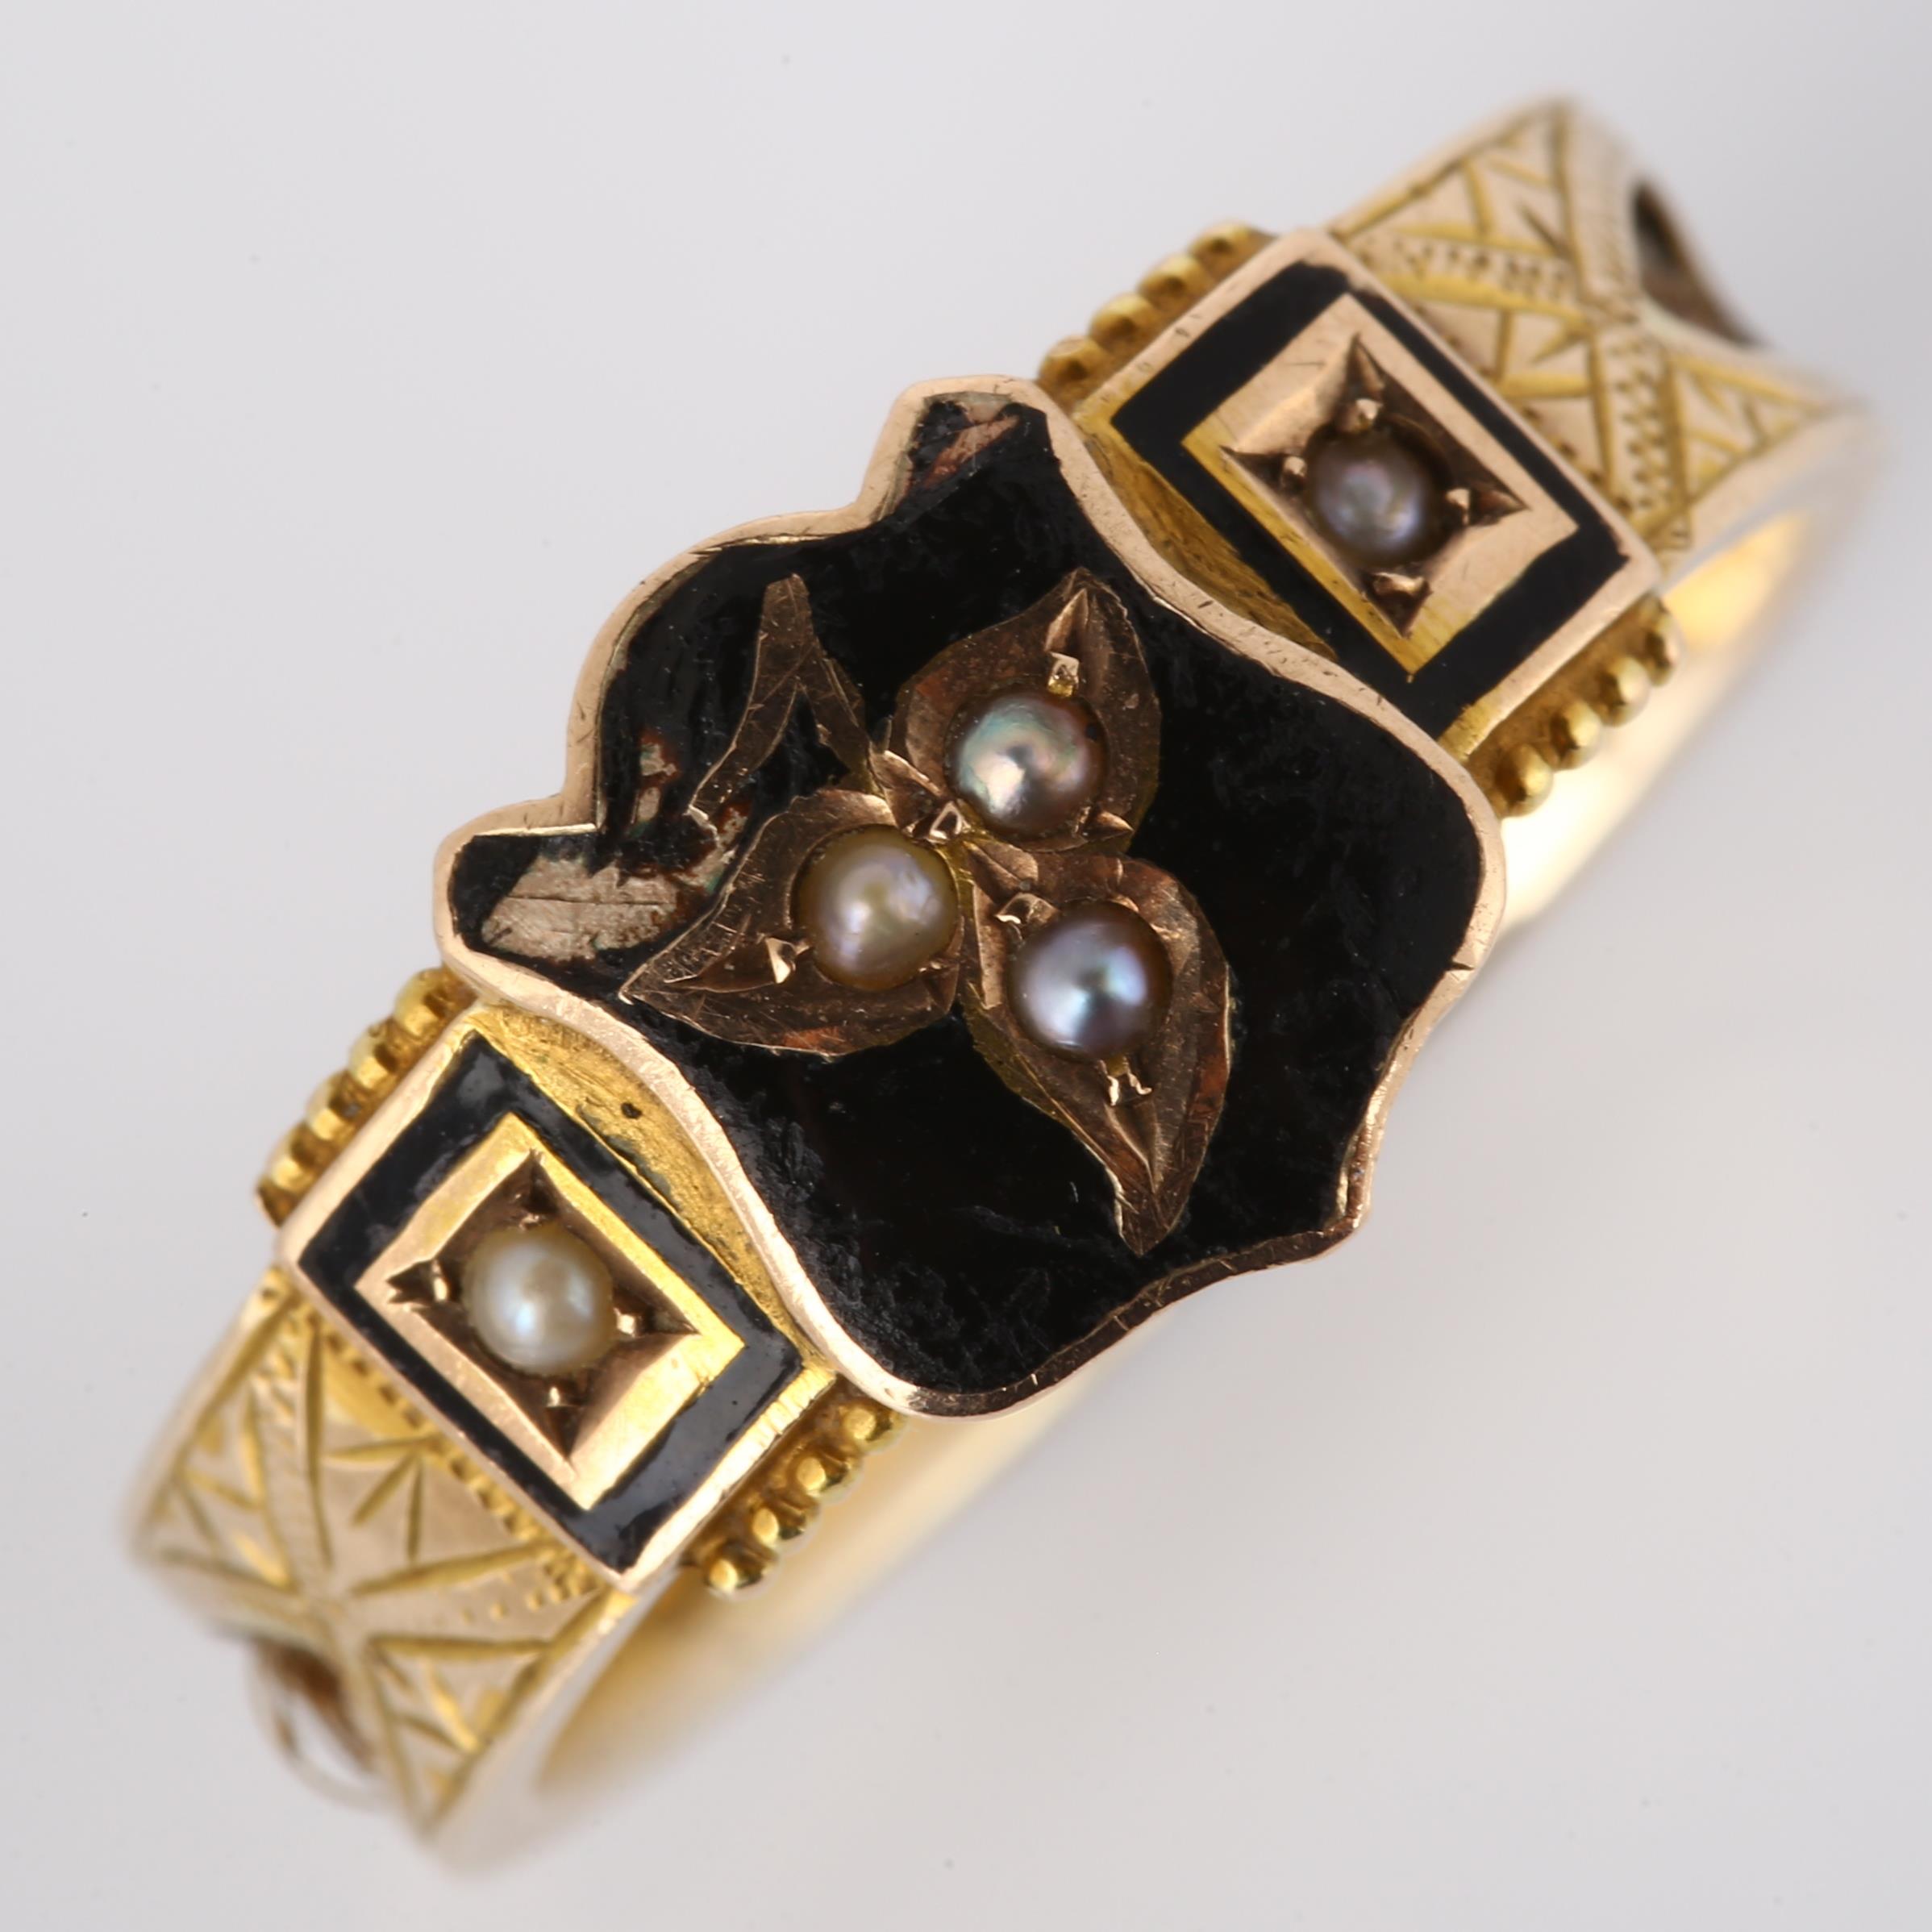 A 9ct gold pearl, black enamel and hair mourning ring, with inset woven hair shank and central